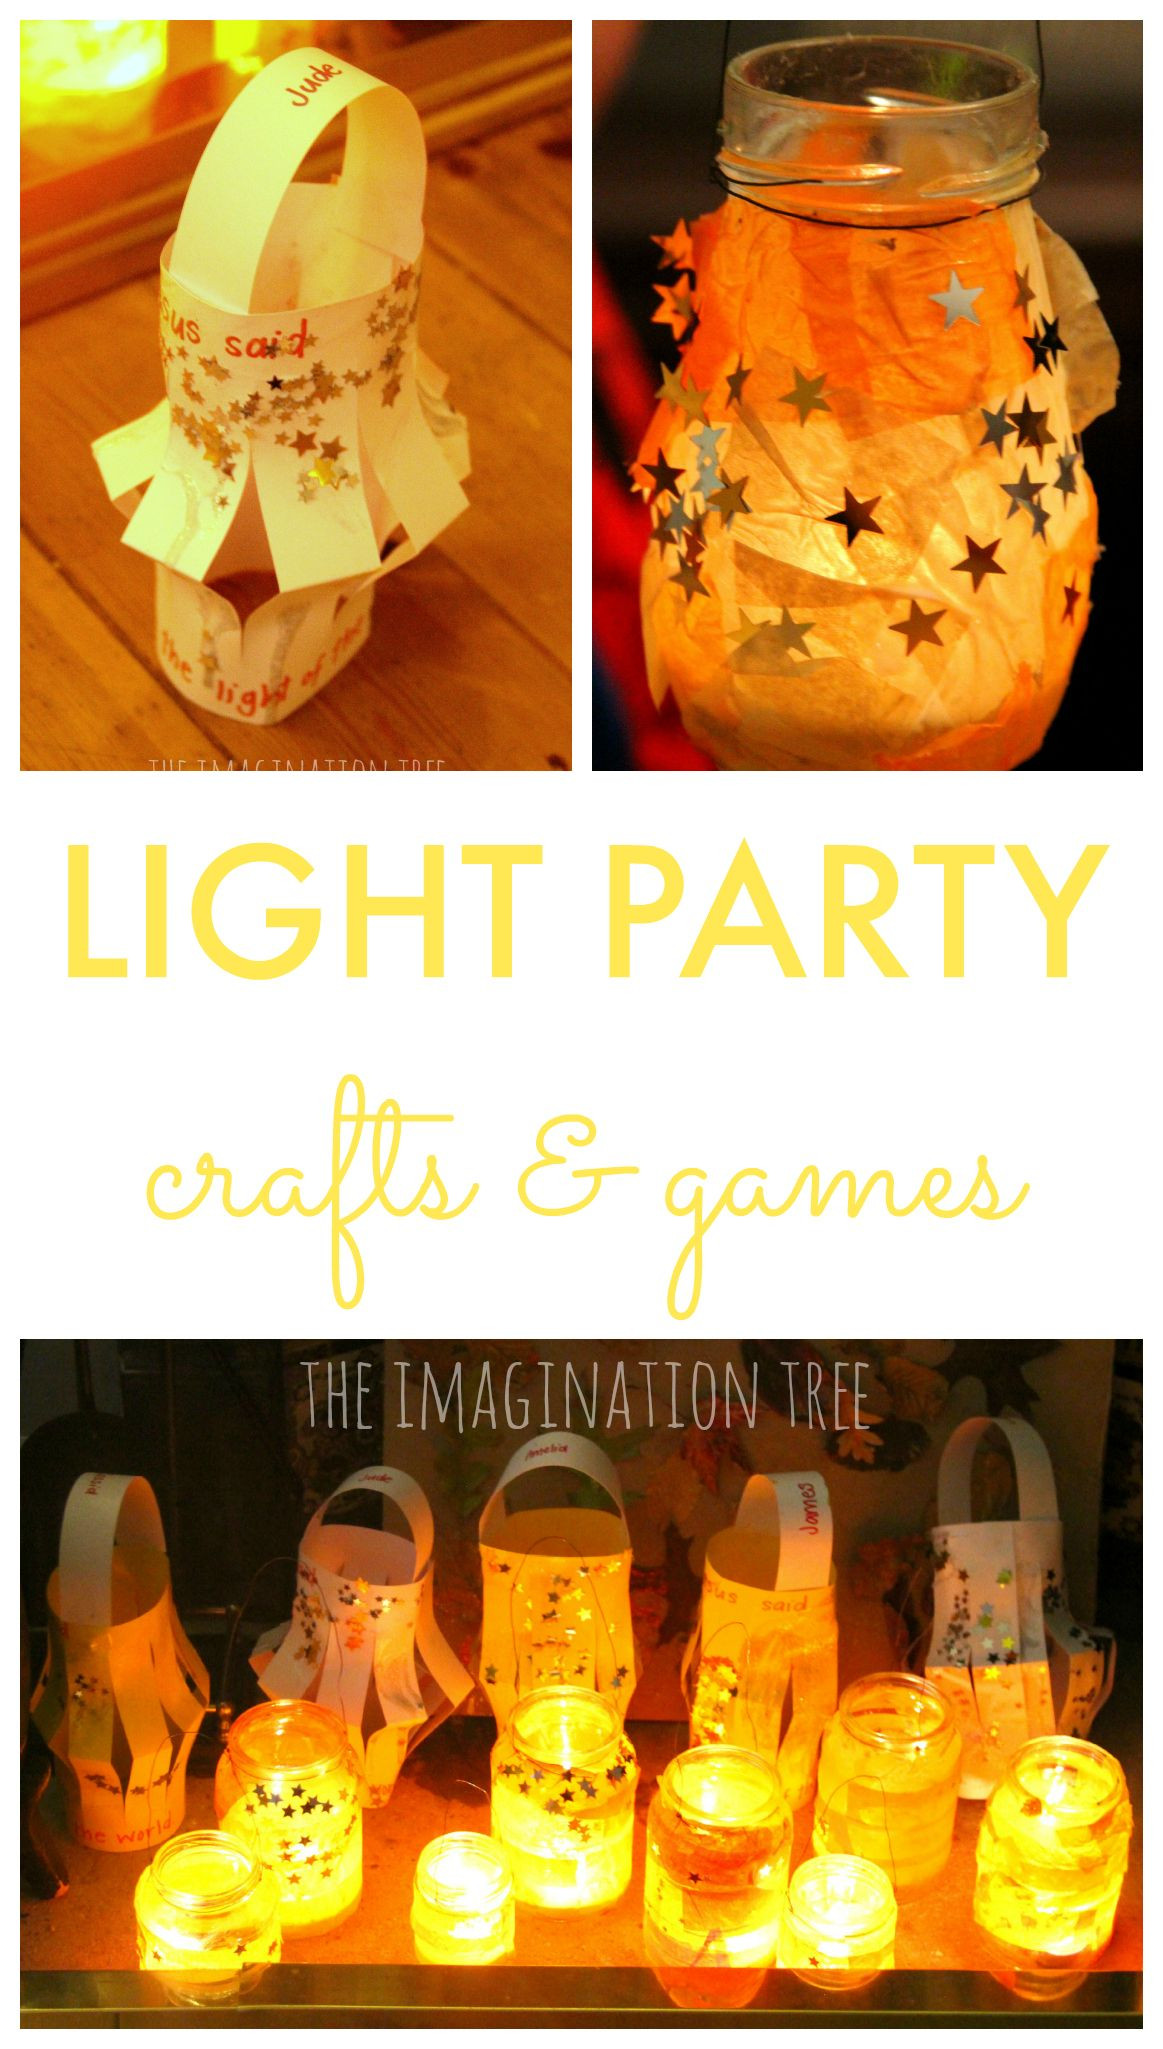 Christian Halloween Party Ideas
 Light Party Crafts and Games for Kids